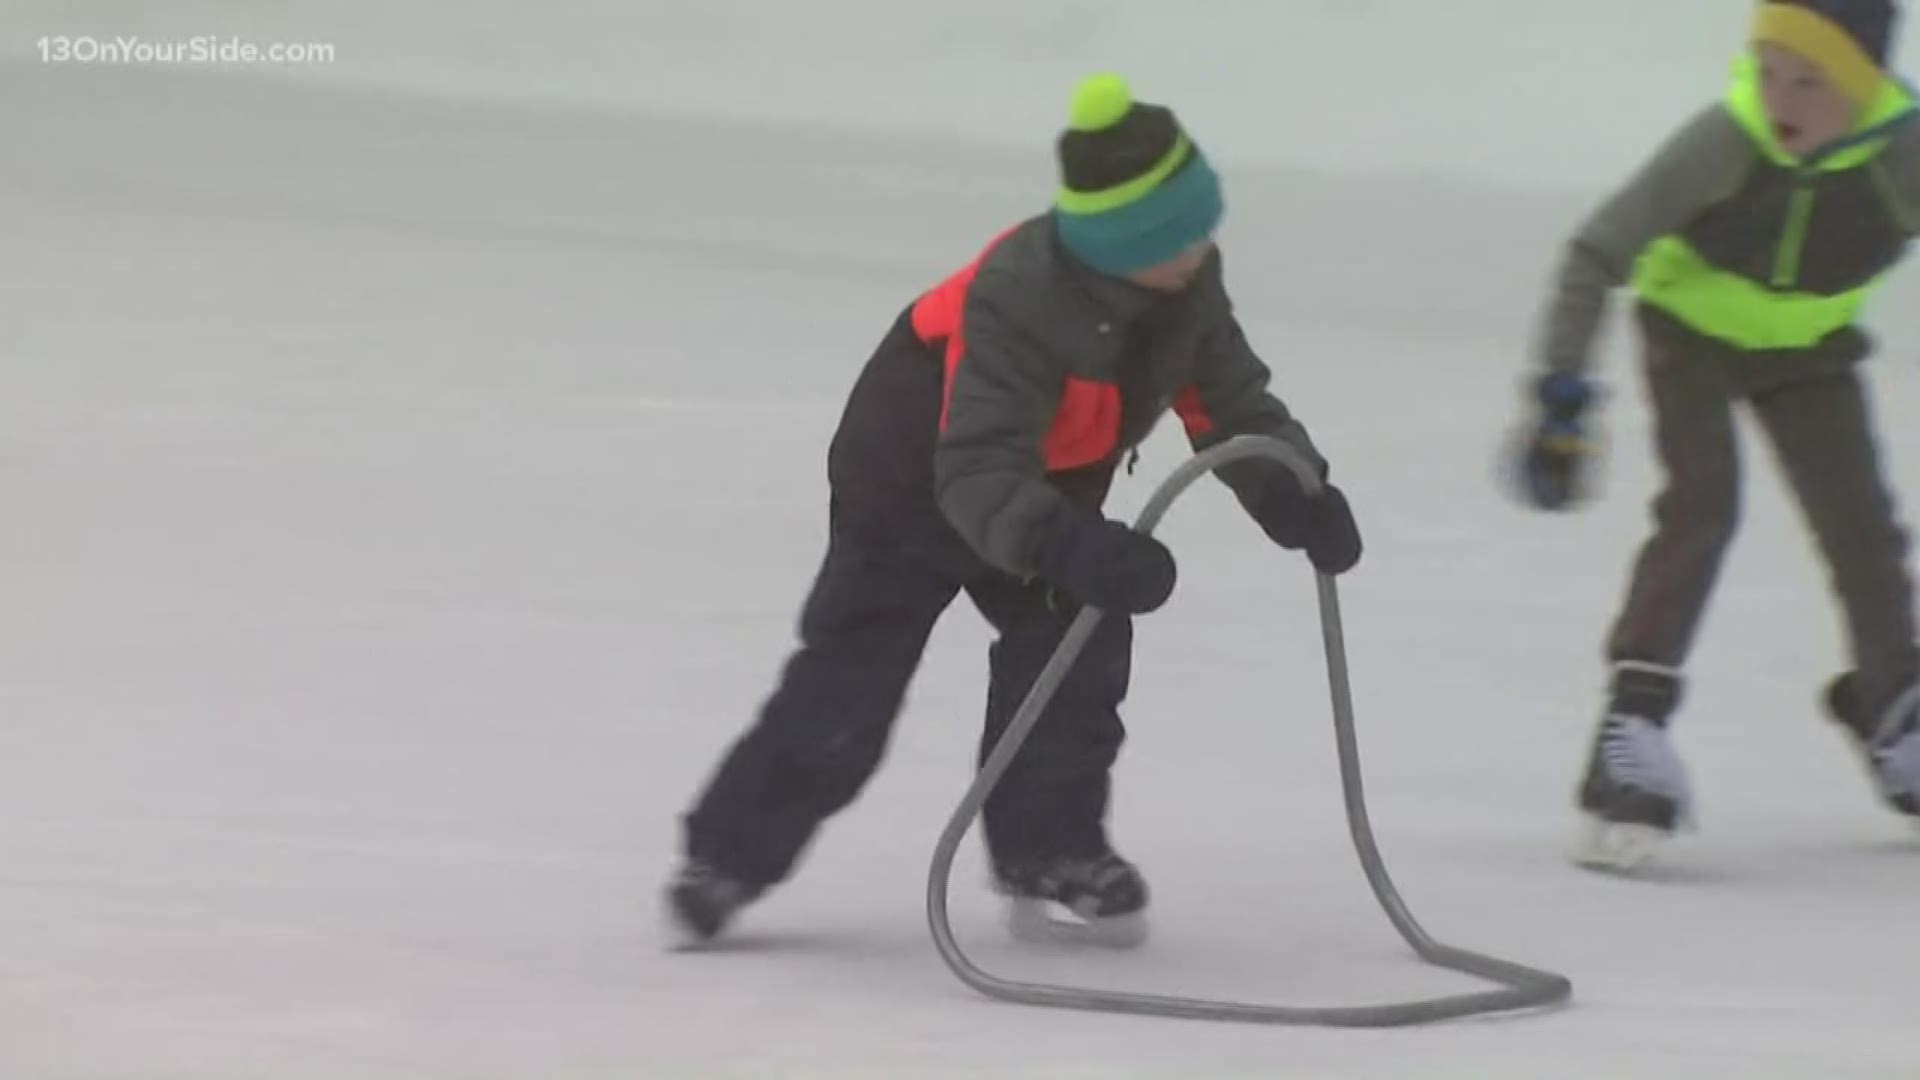 13 ON YOUR SIDE's Angela Cunningham is live with the director of the Muskegon's Winter Complex and how the lack of snow this season has impacted the facility.